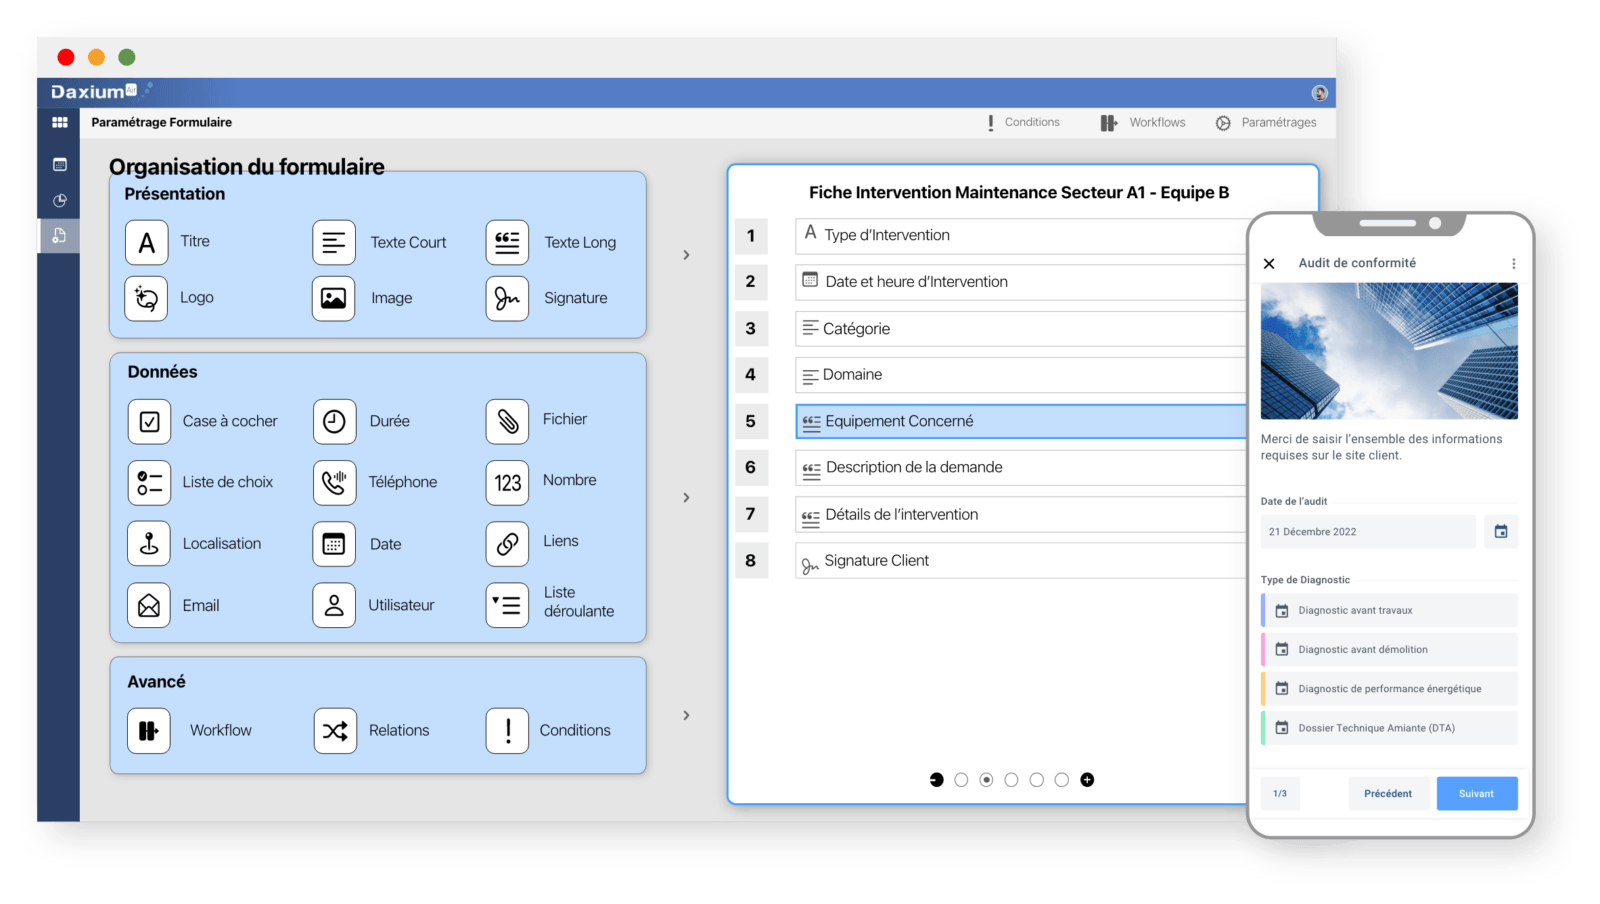 Easily create web and mobile forms for your audit and control activities